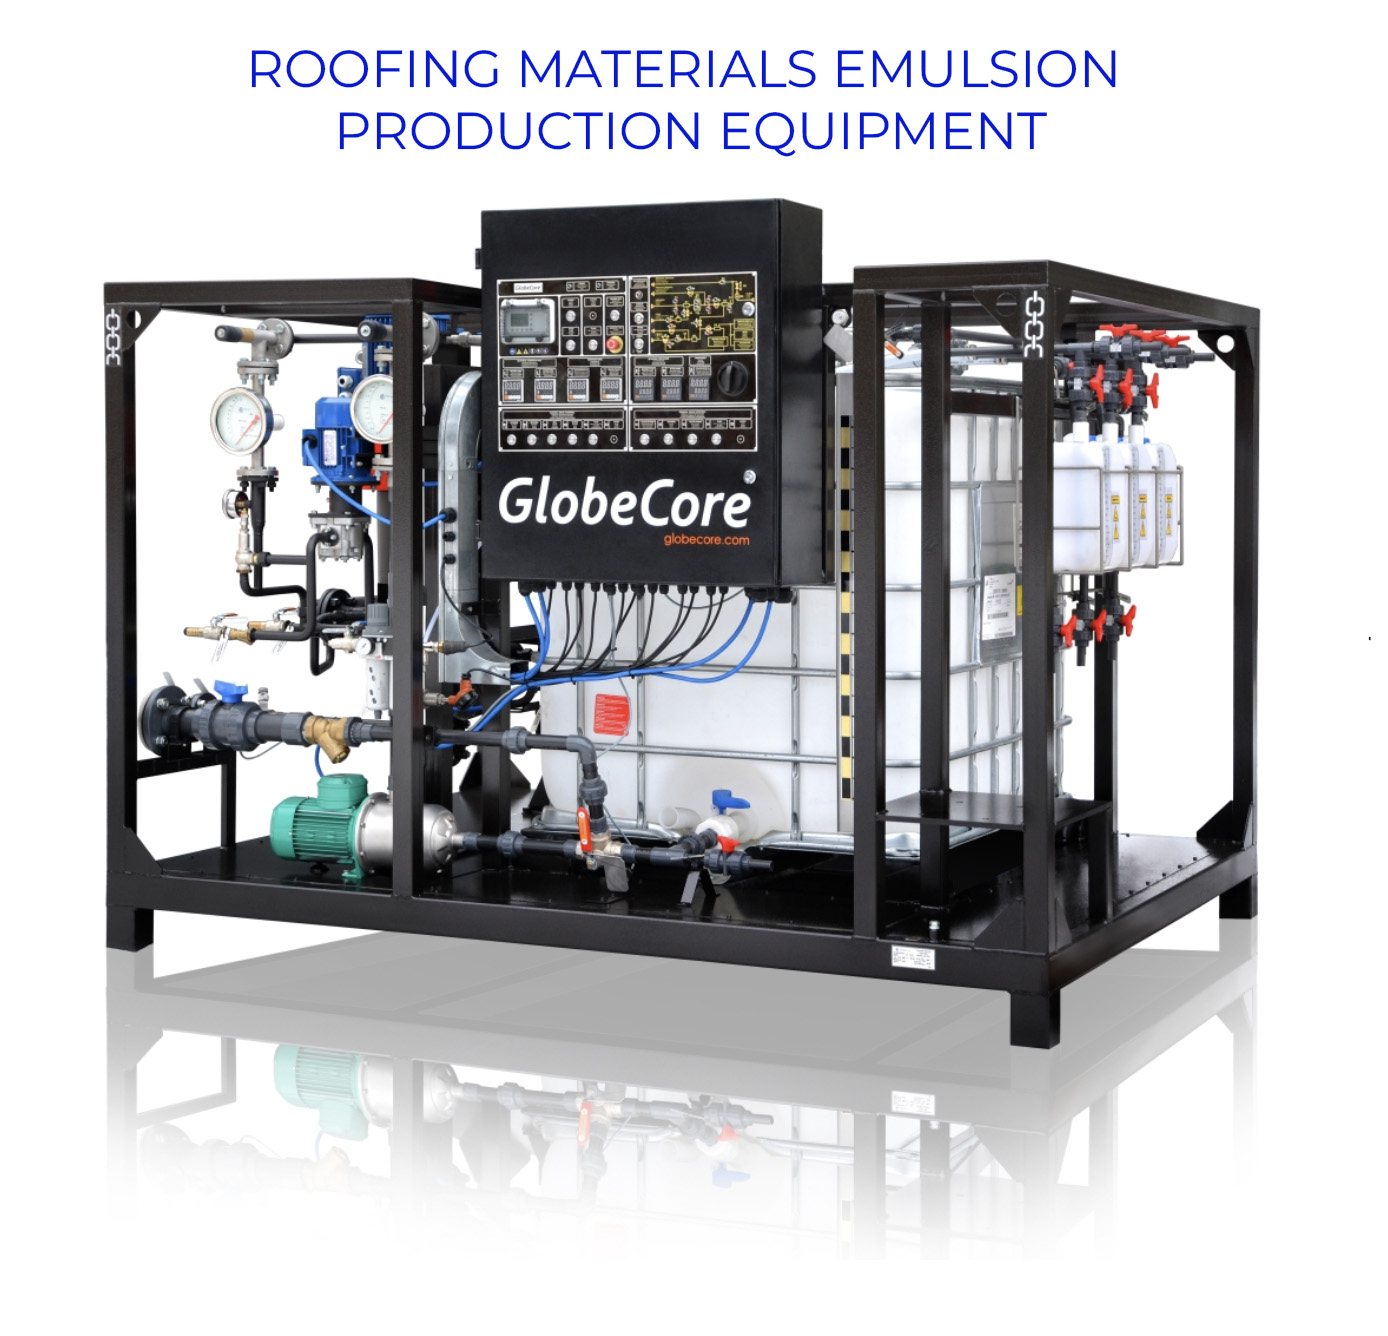 Roofing materials emulsion production equipment